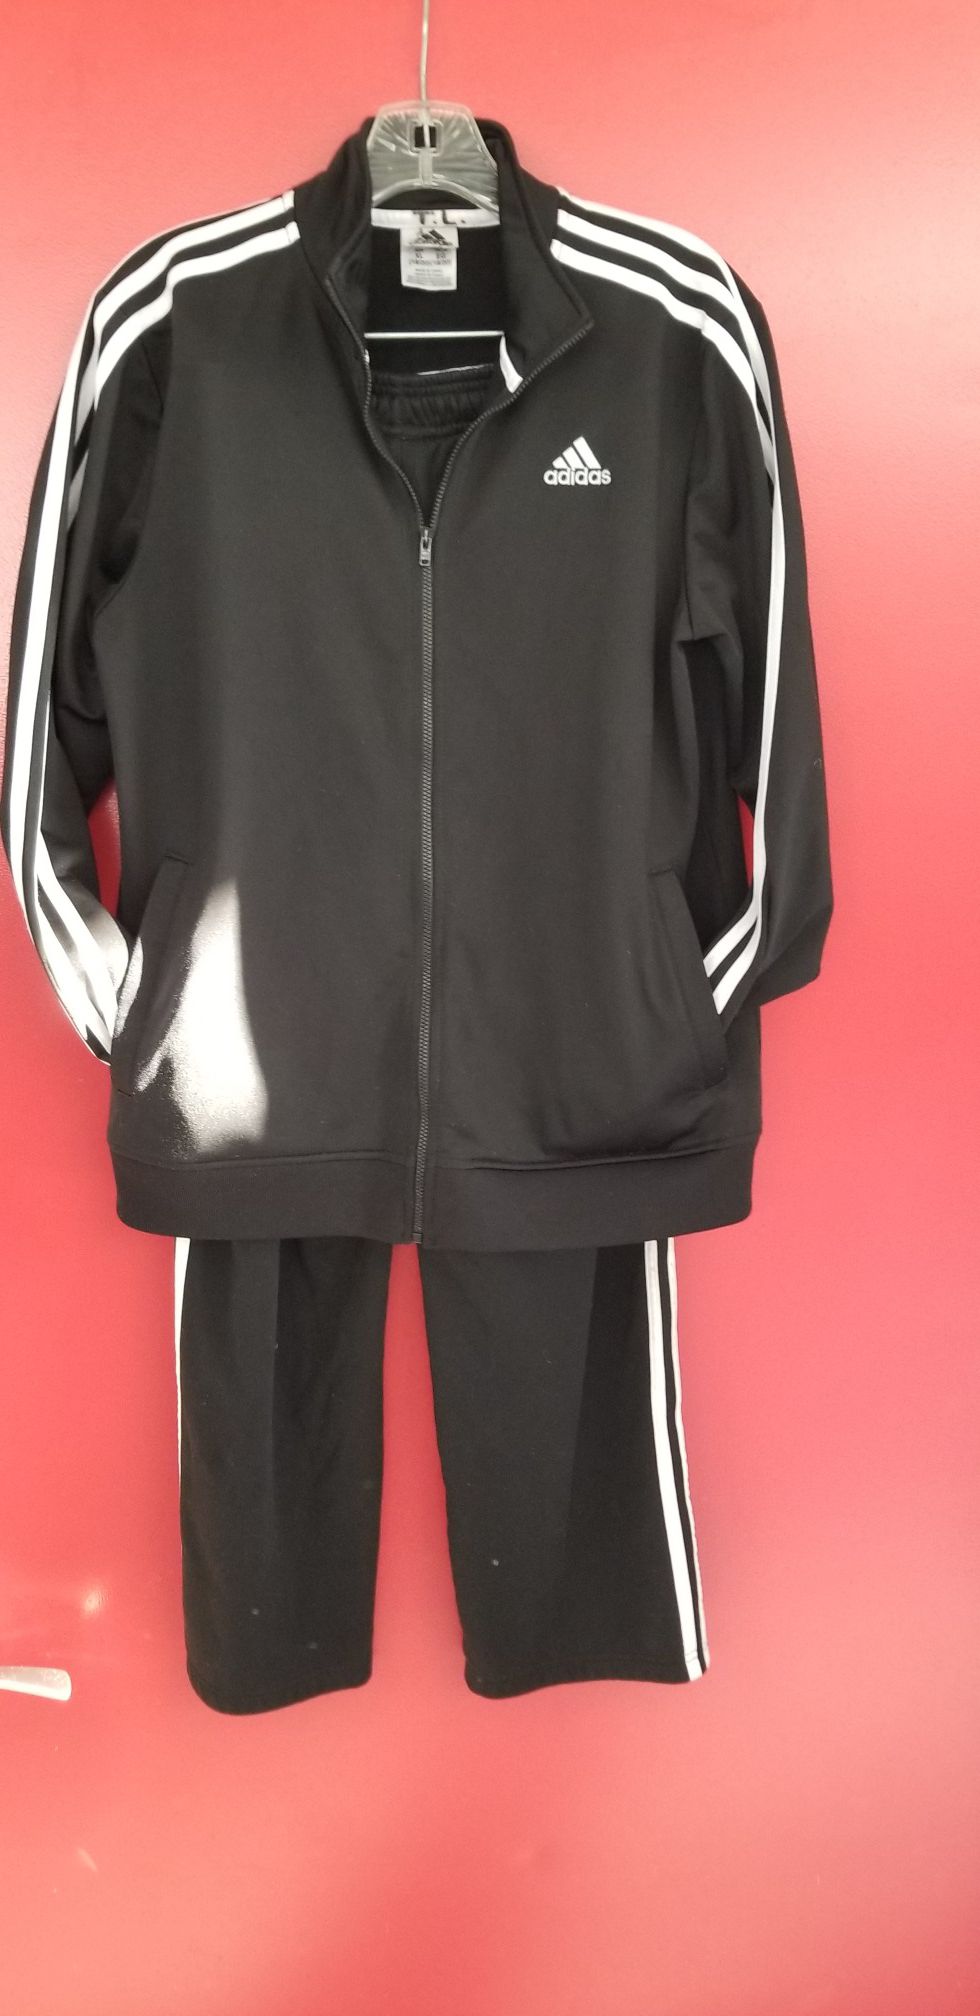 Boys youth adidas suit size xl